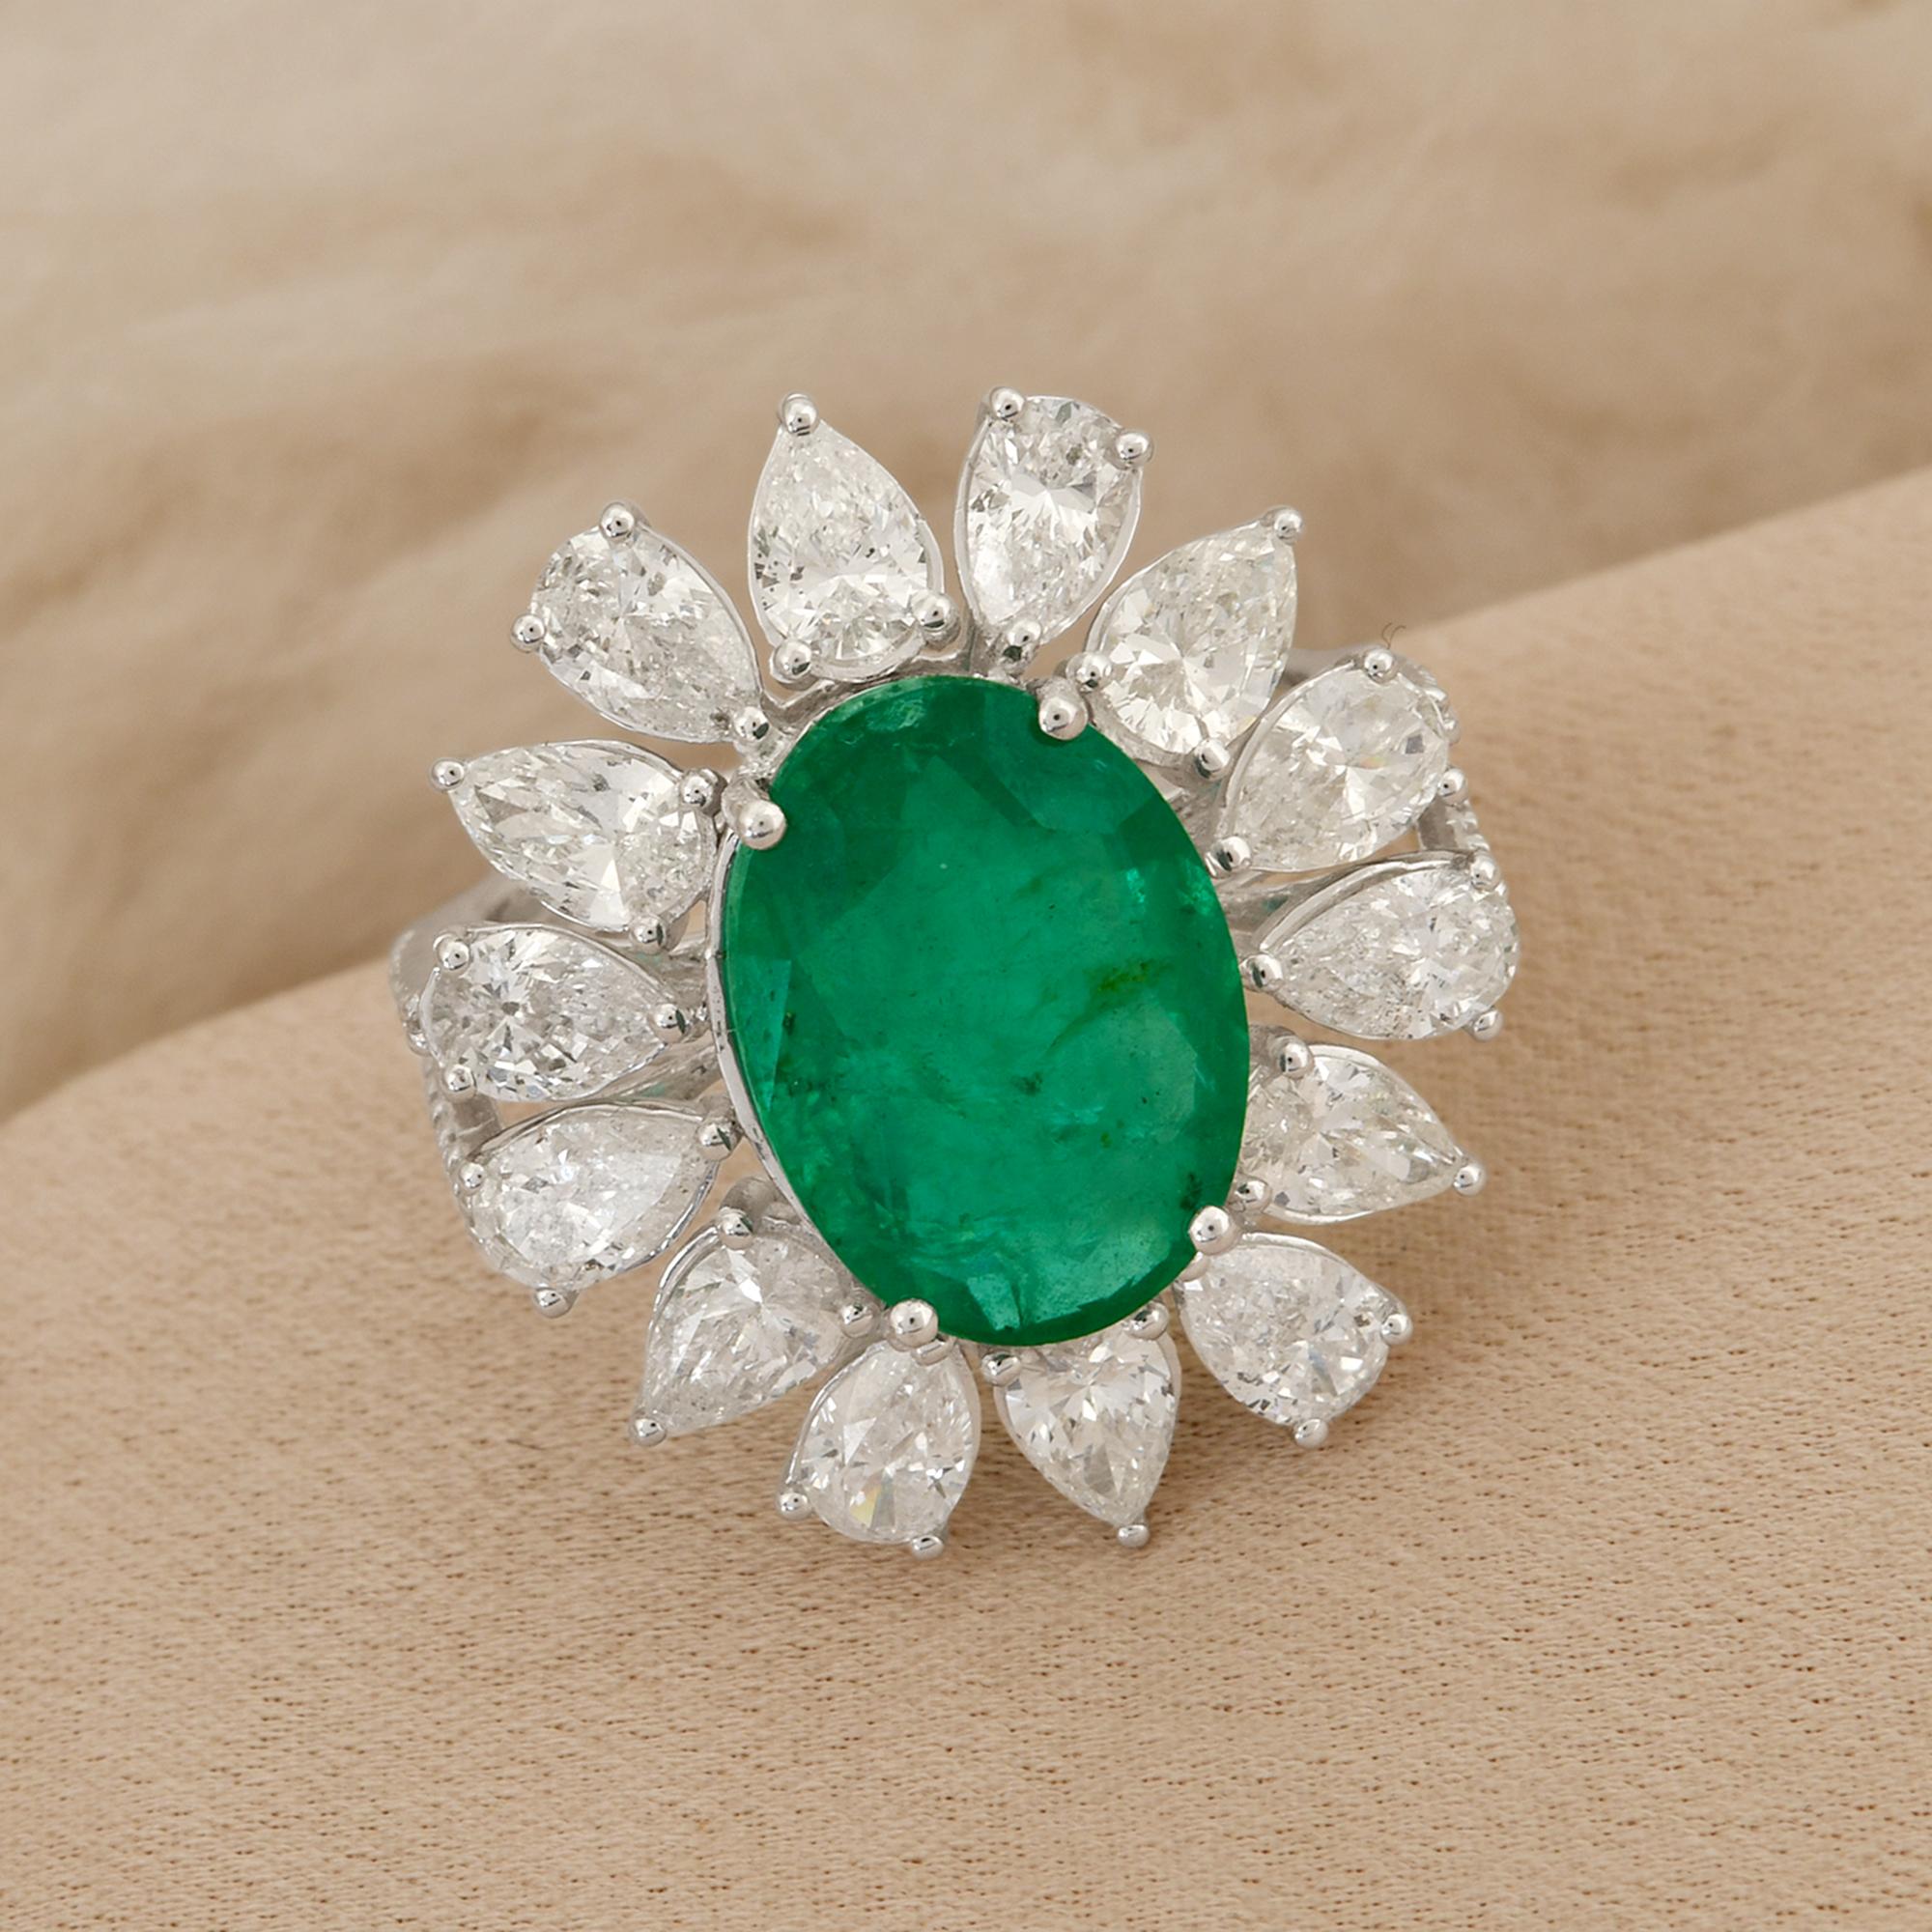 For Sale:  Oval Natural Emerald Gemstone Flower Ring Pear Diamond 18k White Gold Jewelry 3